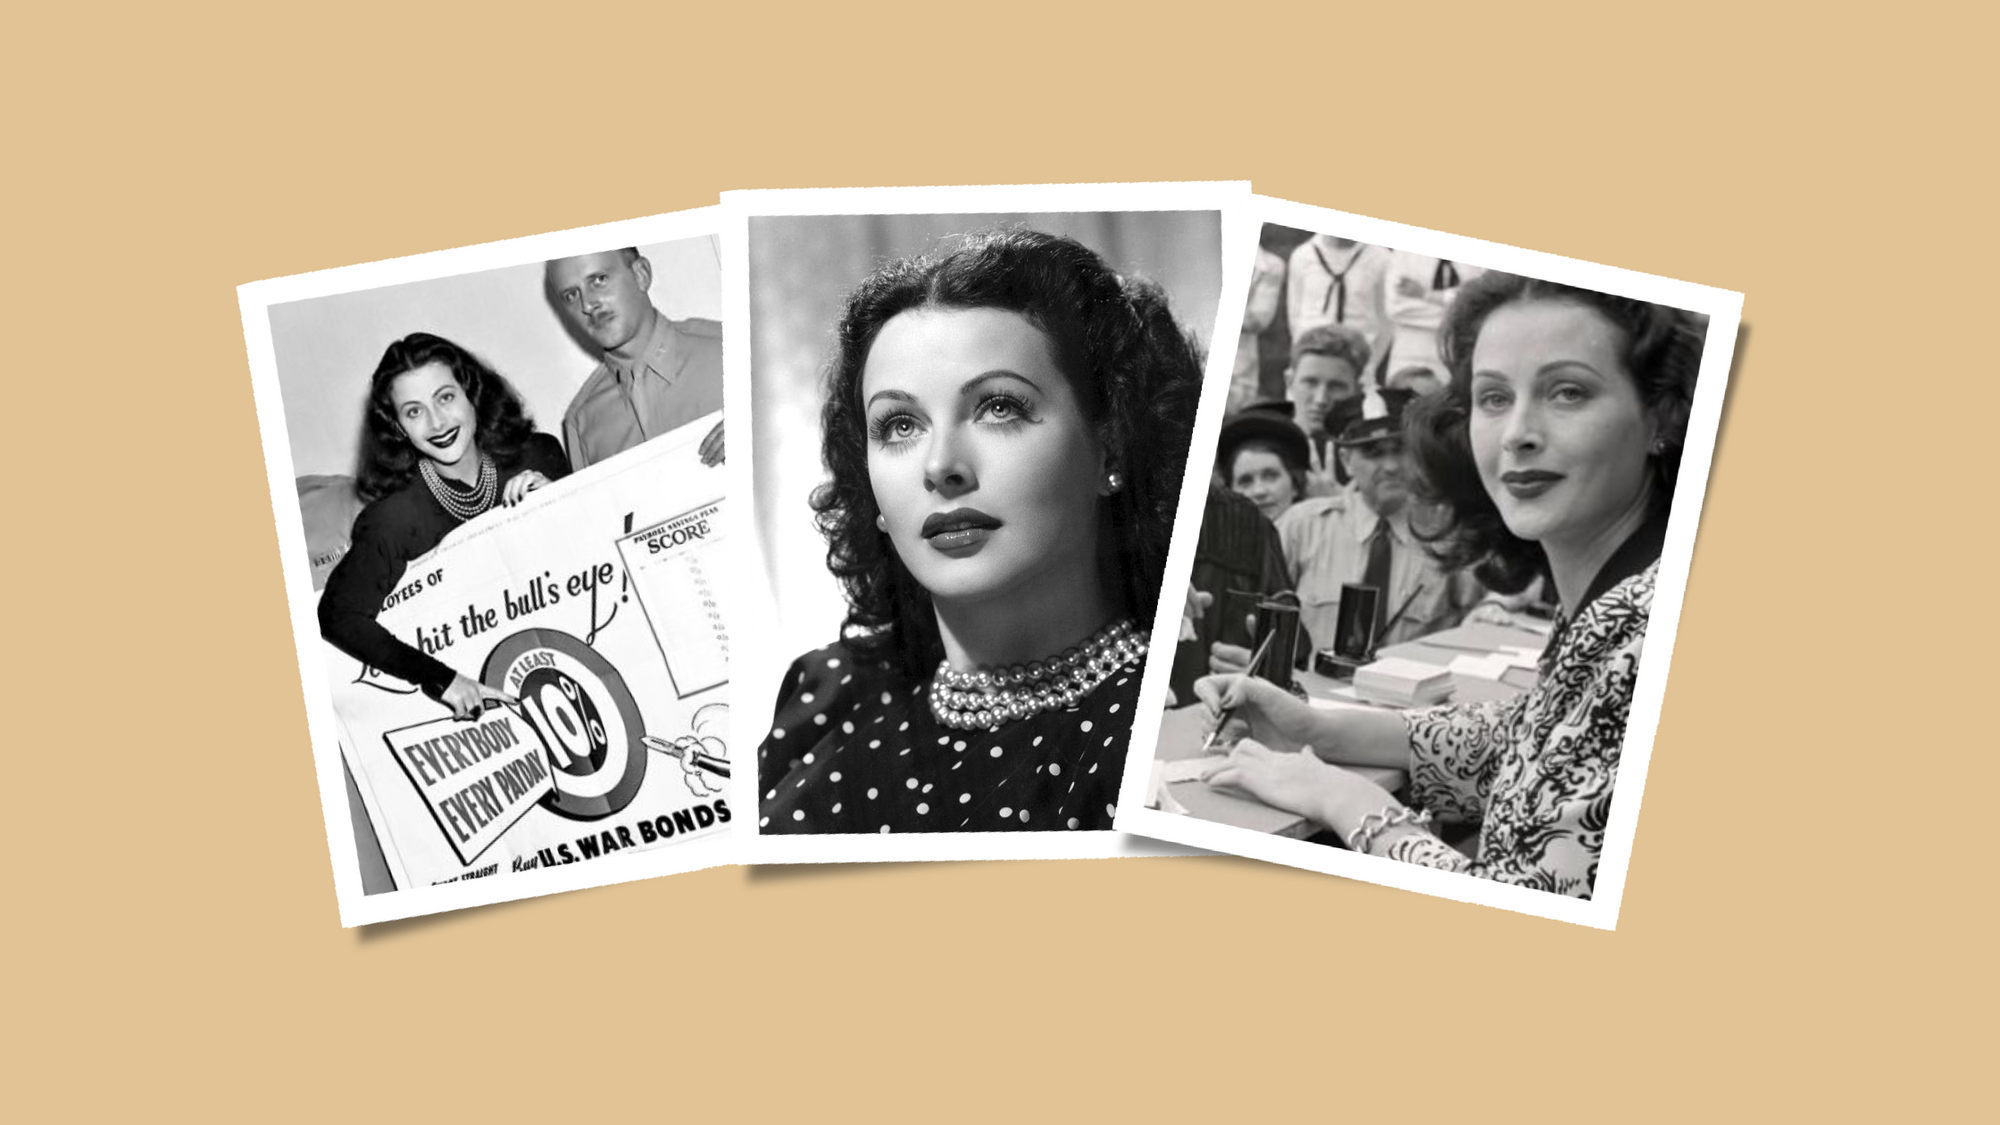 Hedy Lamarr - Hollywood Beauty and Mother of Wi-Fi